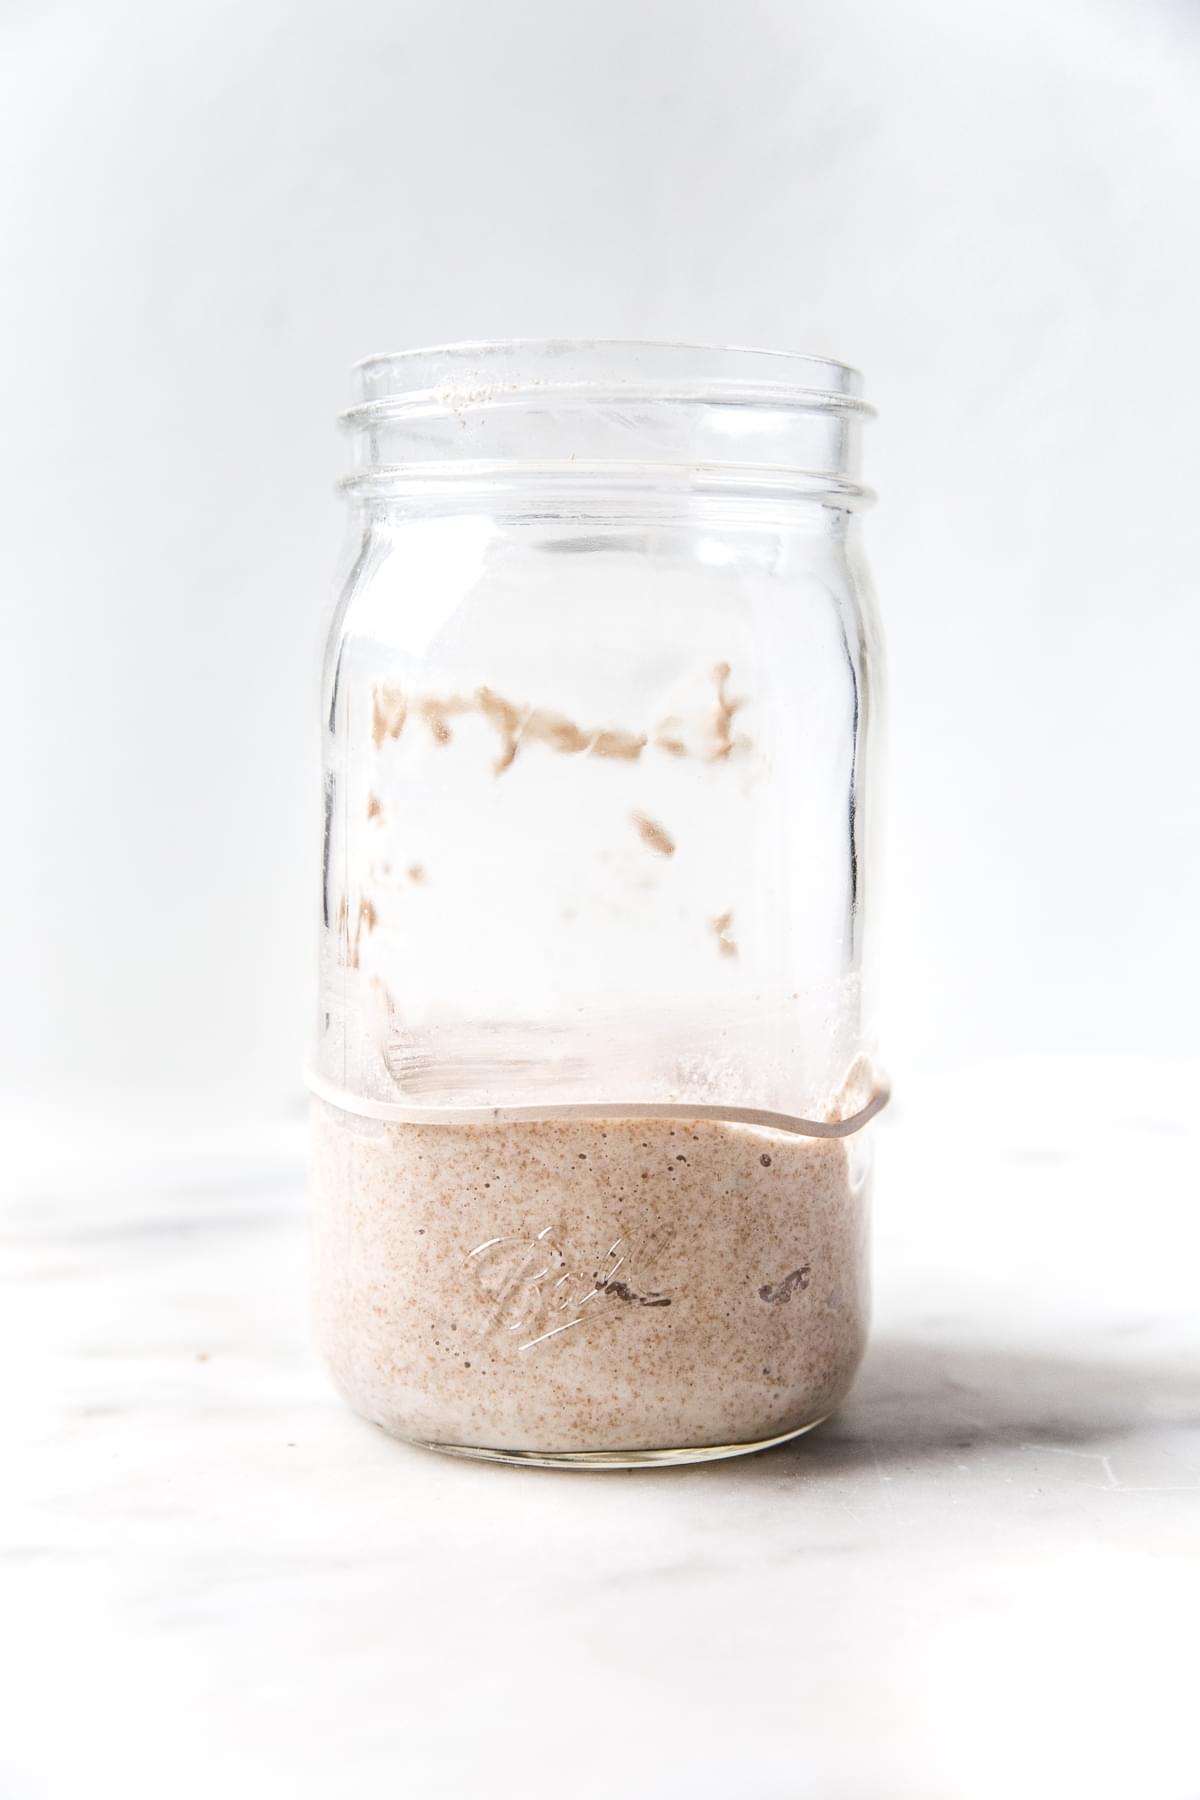 flour and water in a glass jar to make a sourdough starter